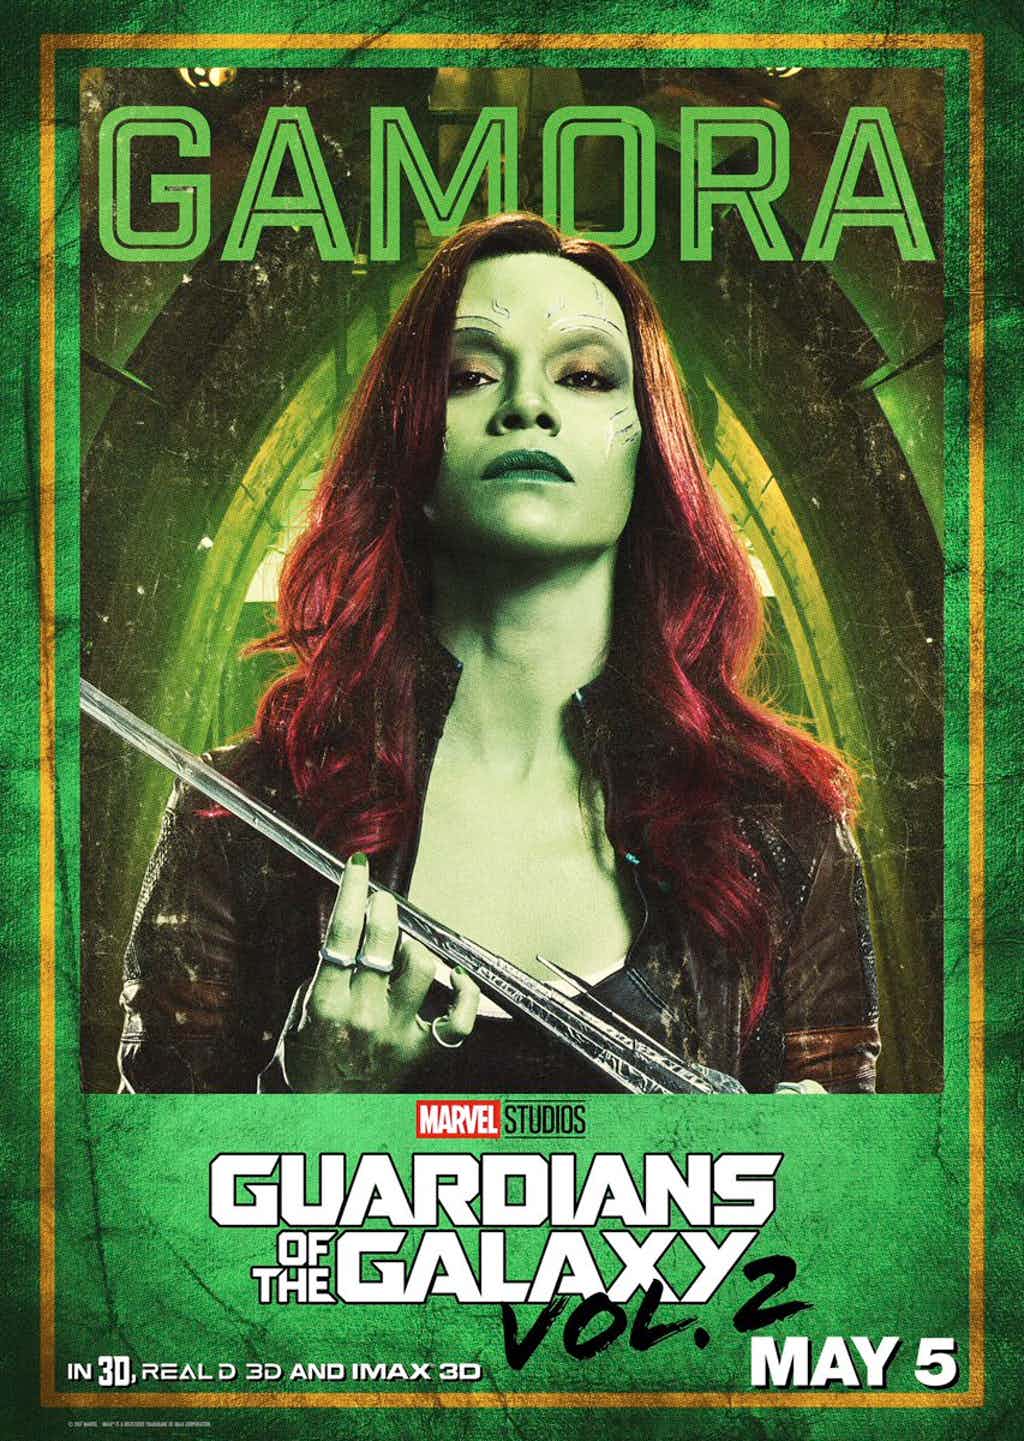 Guardians Of The Galaxy Vol. 2 Character Poster of the Galaxy Photo